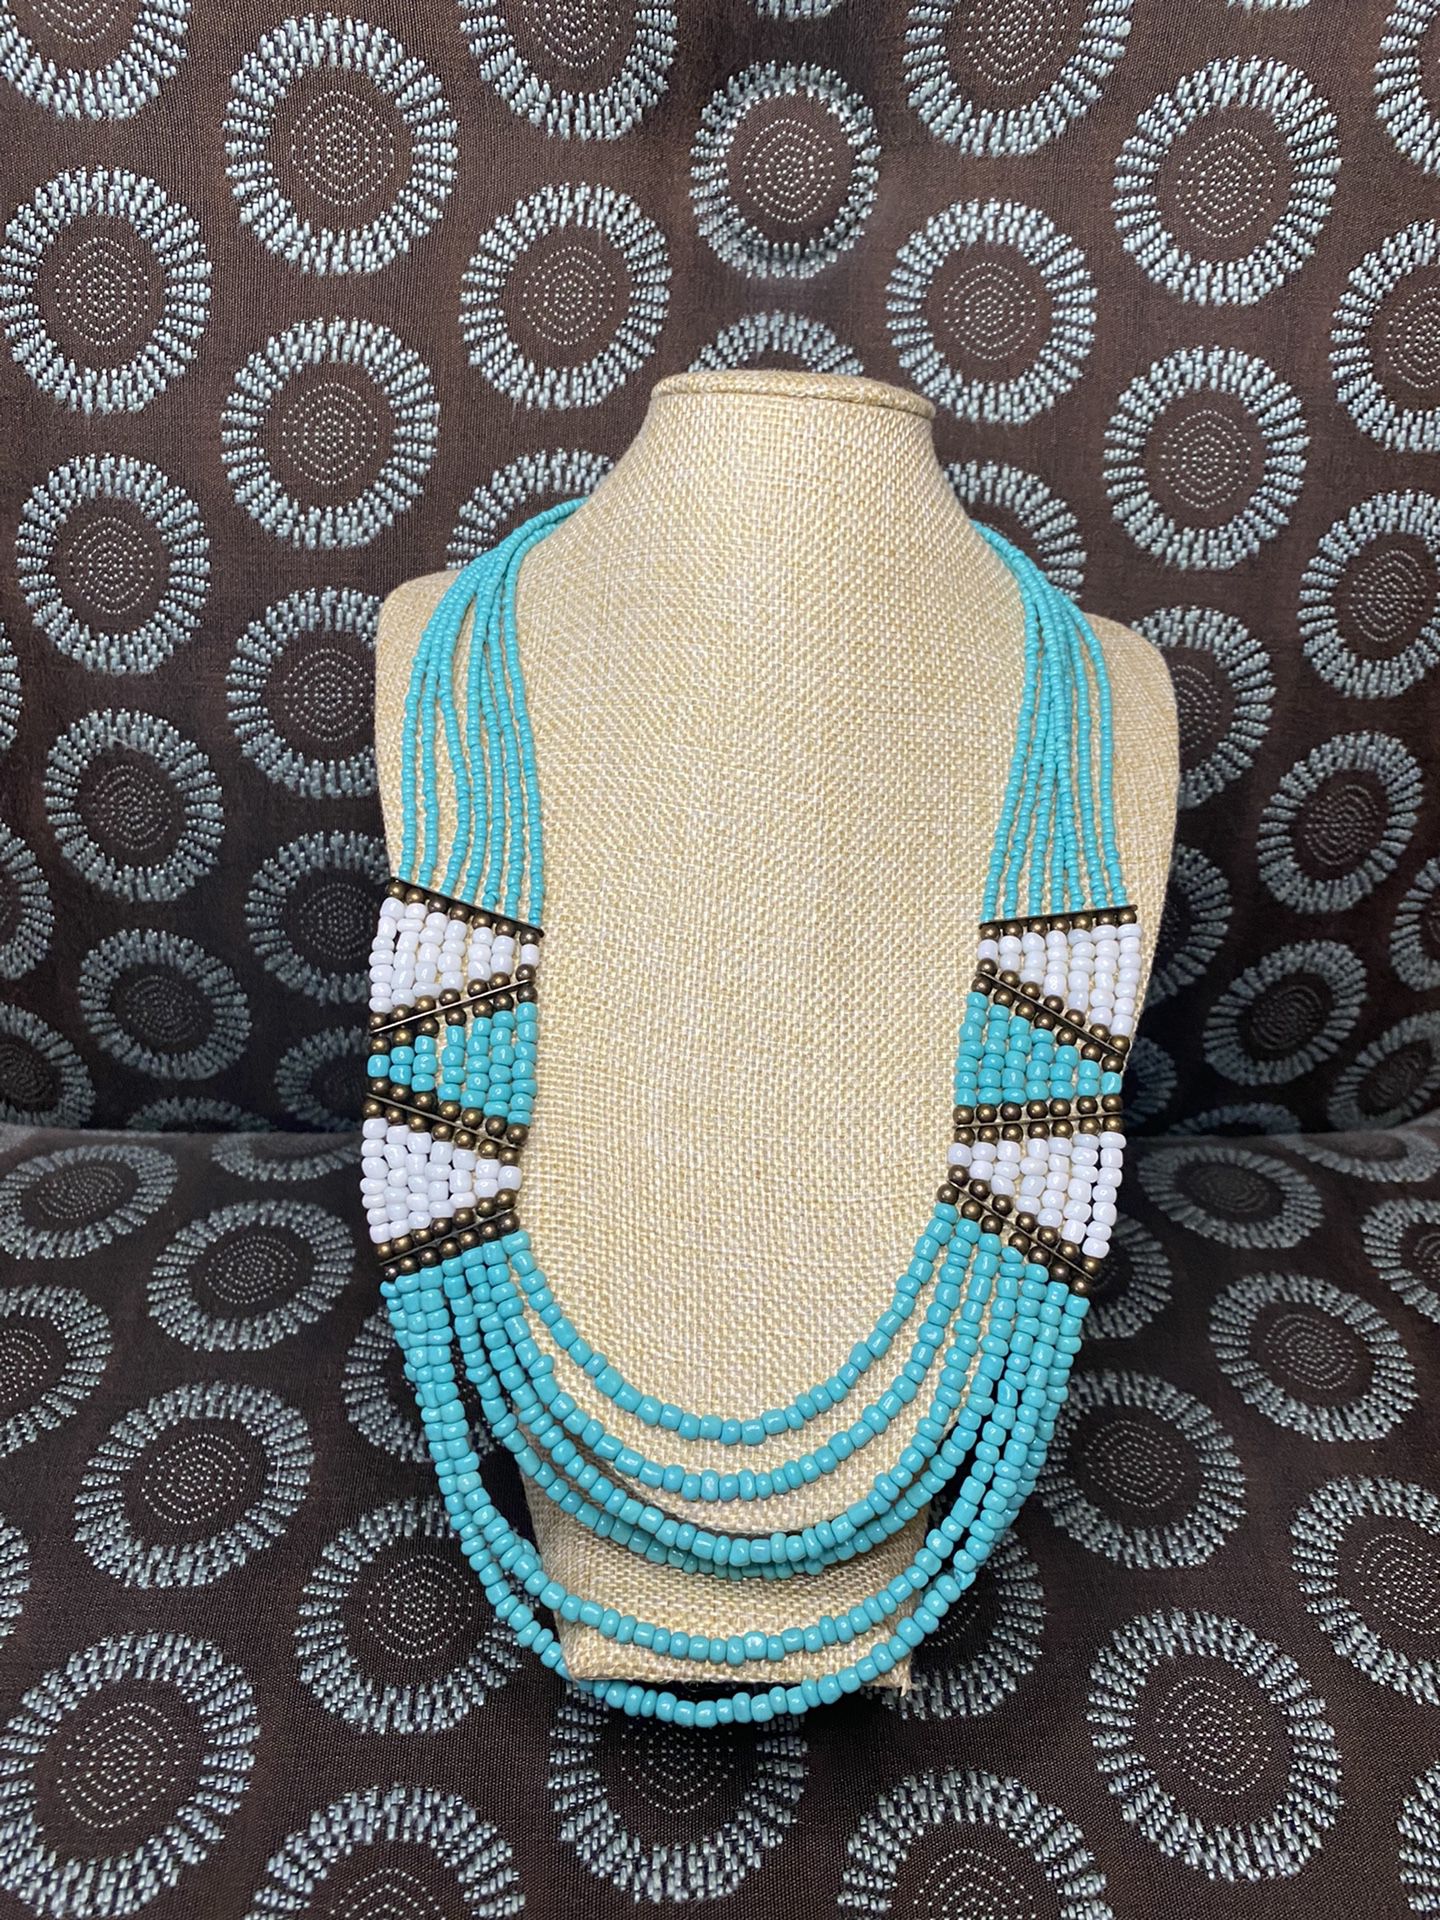 Turquoise Color Necklace 